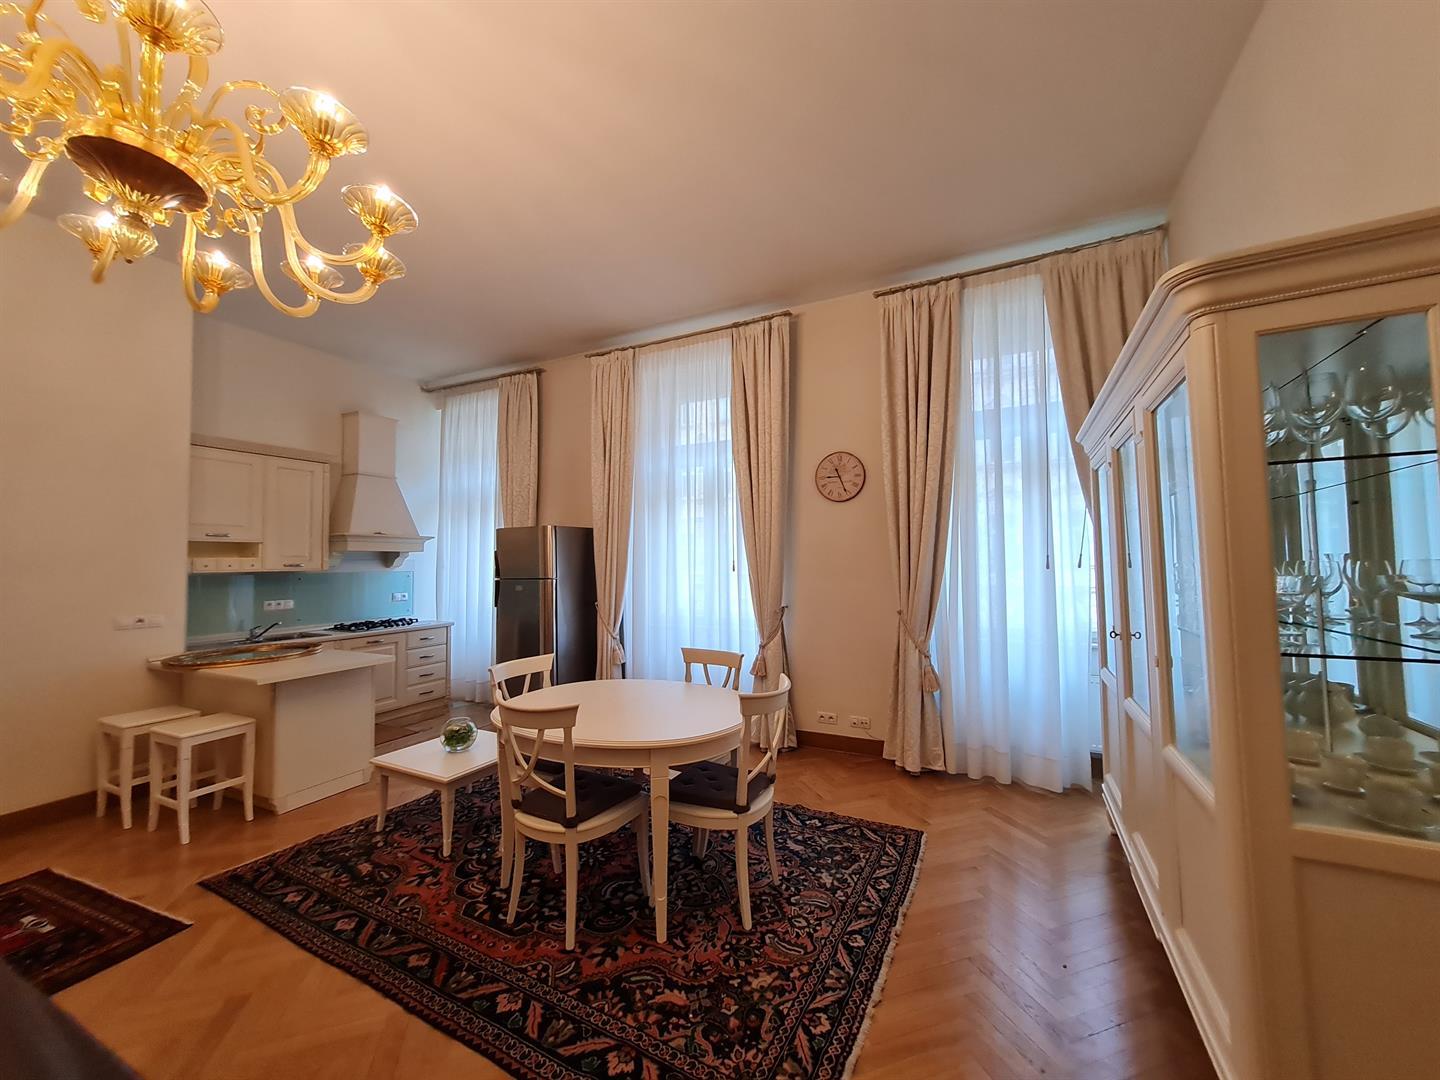 Rent of a luxury residential apartment 3+Kk, 94m2 with a balcony and swimming pool Prague 2